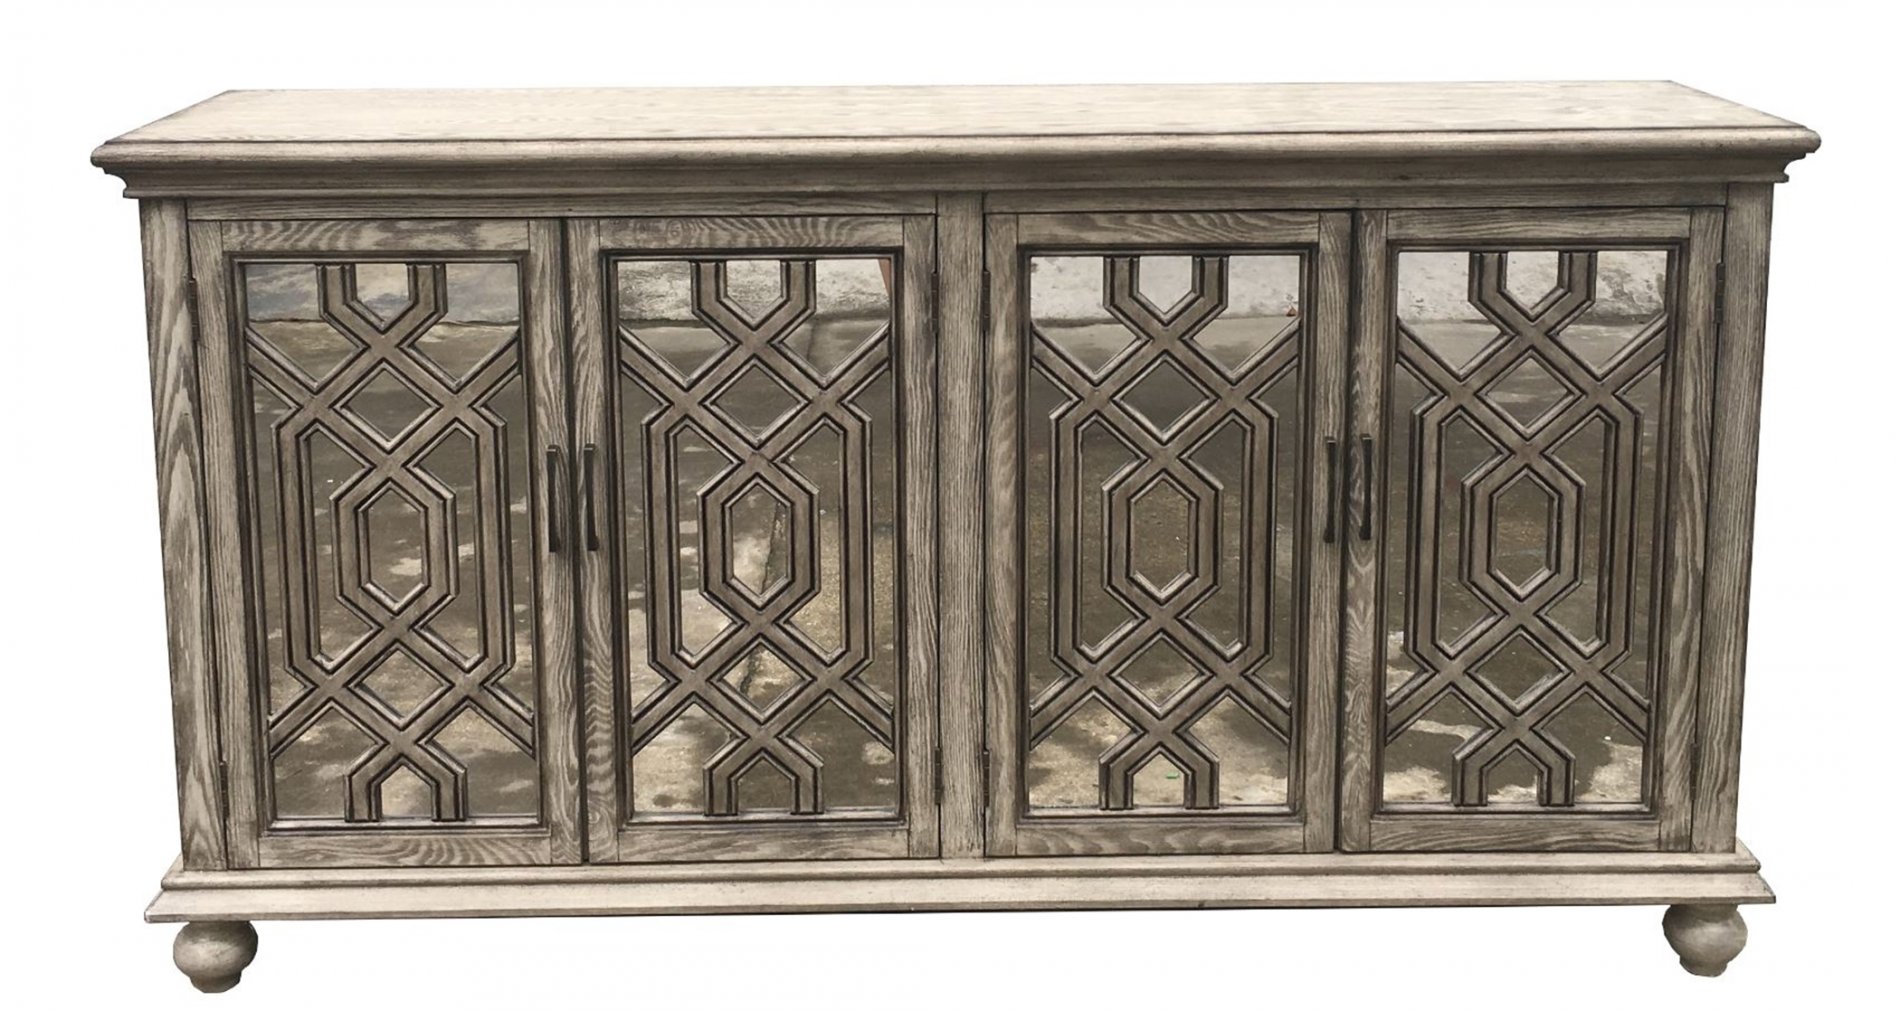 952845 - Accent Cabinet